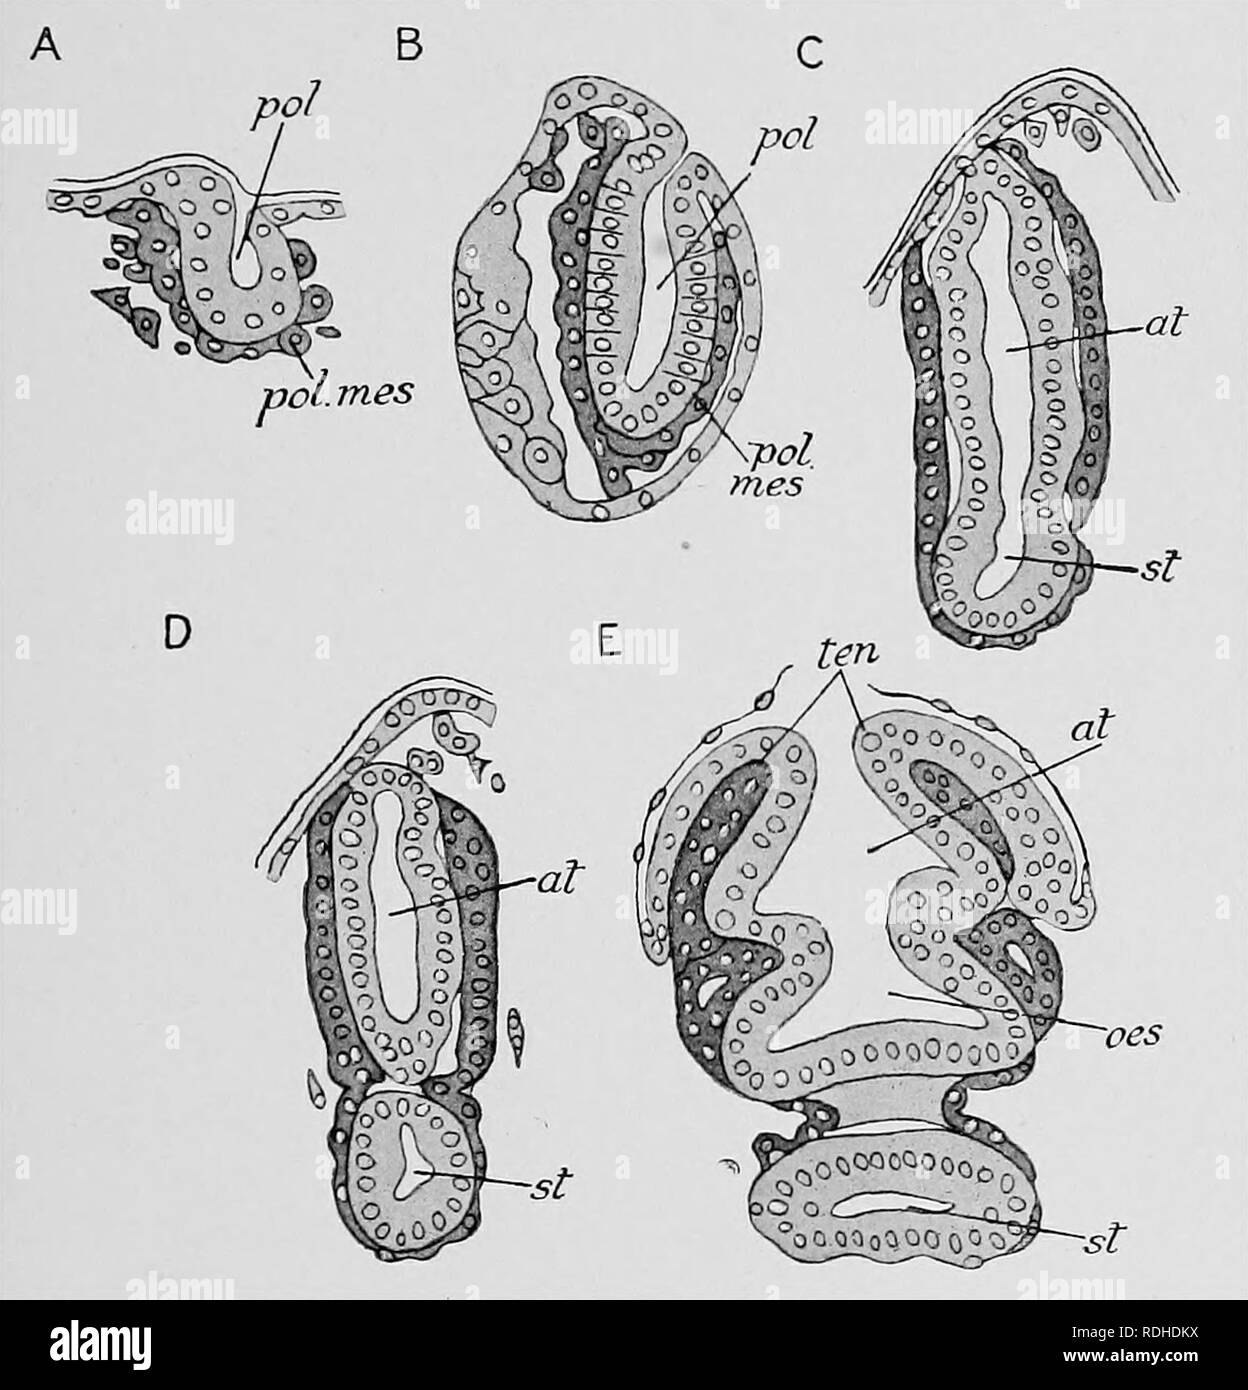 . Text-book of embryology. Embryology. XI POLYZOA 397 eventually cut off from that of the parent zooecium by a mesodermic septum, but before this happens the first rudiment of the new polypide appears in the new zooecium as an ectodermic thickening, which later becomes an ectodermic pouch open to the exterior, except in so far as it is roofed over by the common cuticle or. Fig. 317.—Stages in the developmeut of tlie bud of Bugula aidcularia. (After Seeliger.) A, the early rudiment of the polypide in the form of an ectodermic invagination. B, a later stage : the rudiment of the polypide is almo Stock Photo